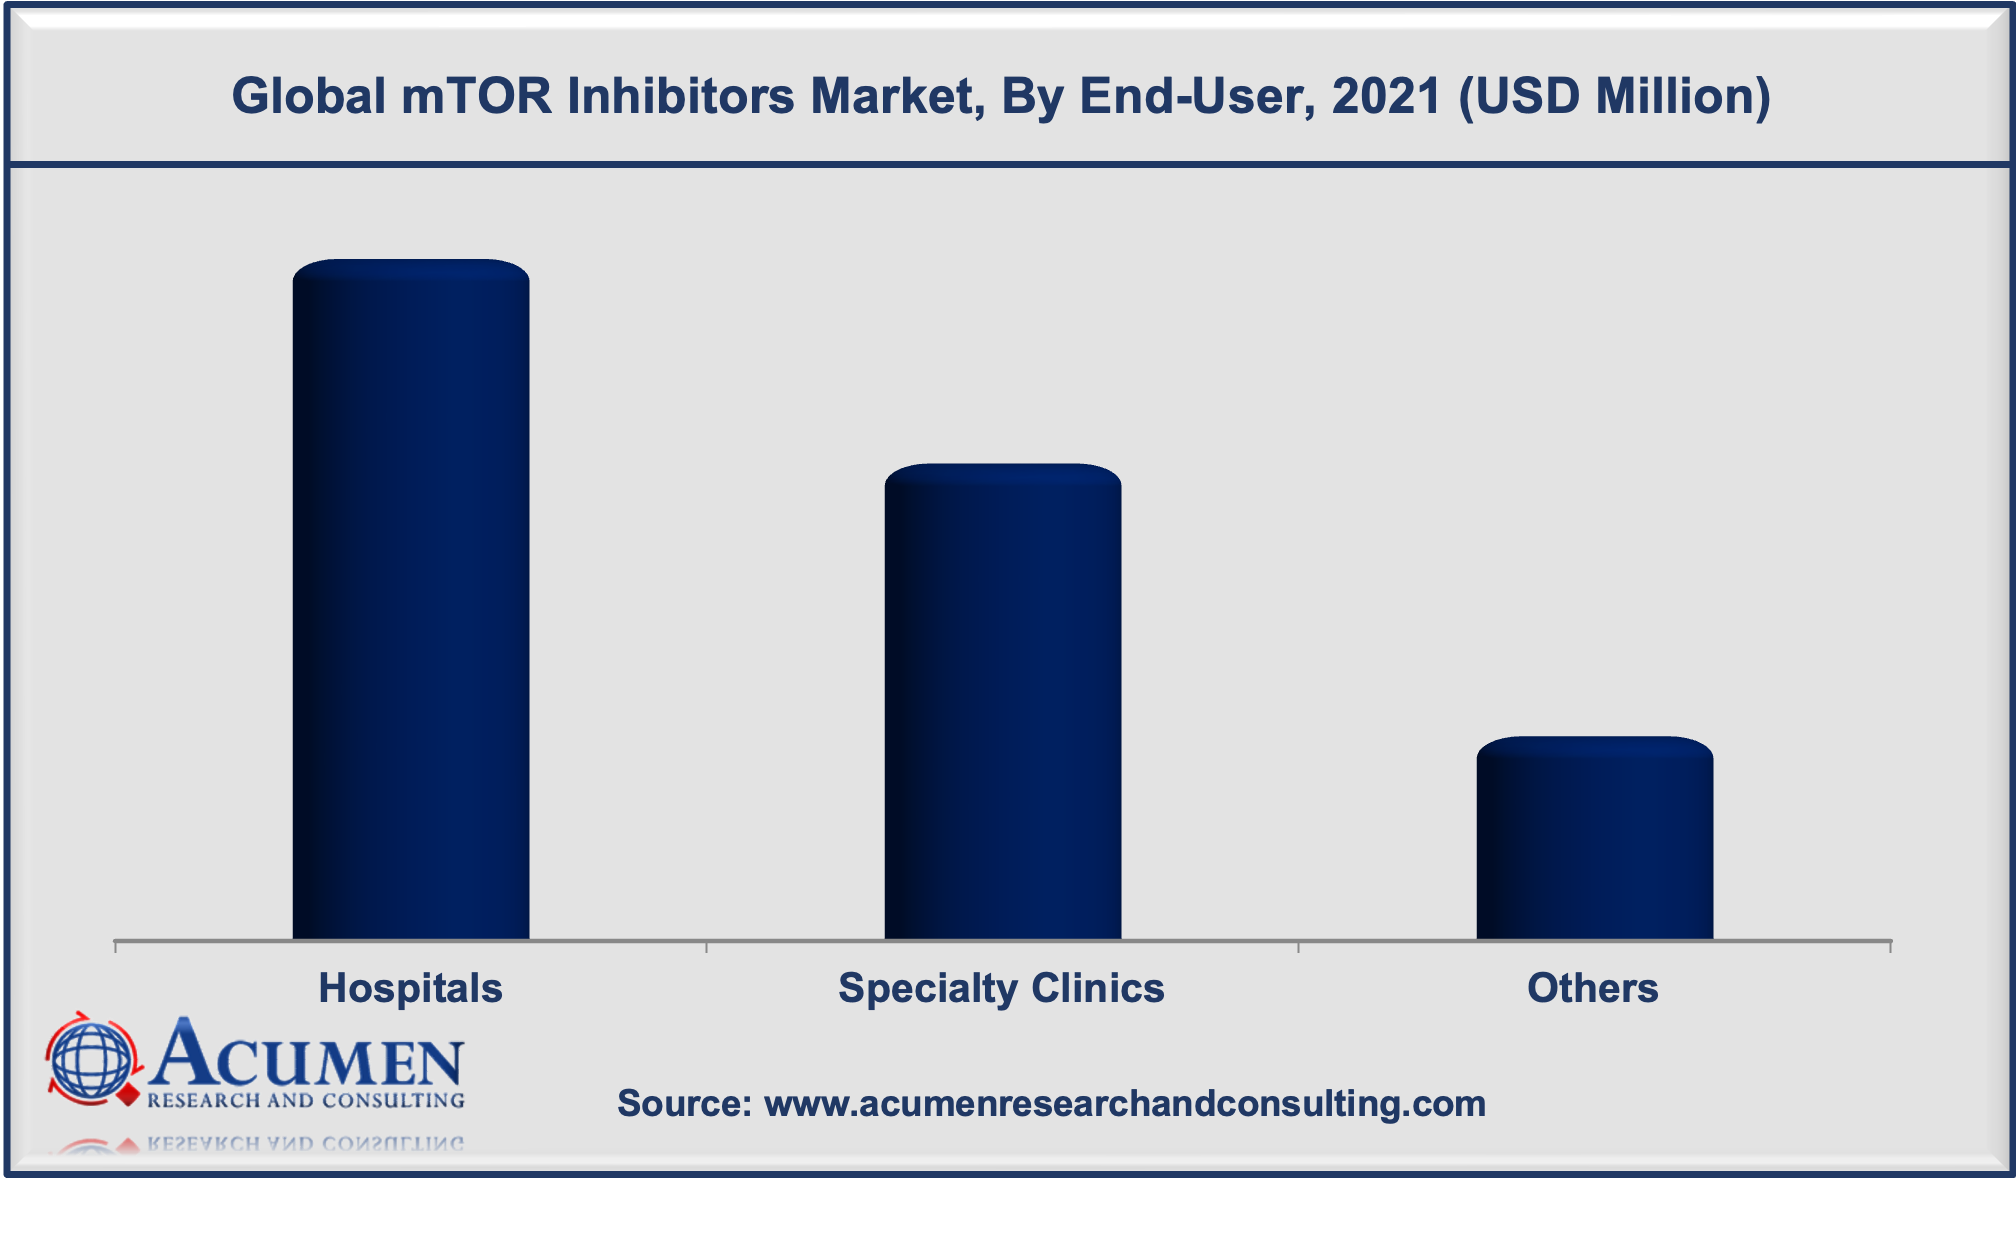 mTOR Inhibitors Market Size is estimated to reach USD 9,445 Mn by 2030, with a significant CAGR of 4.3%